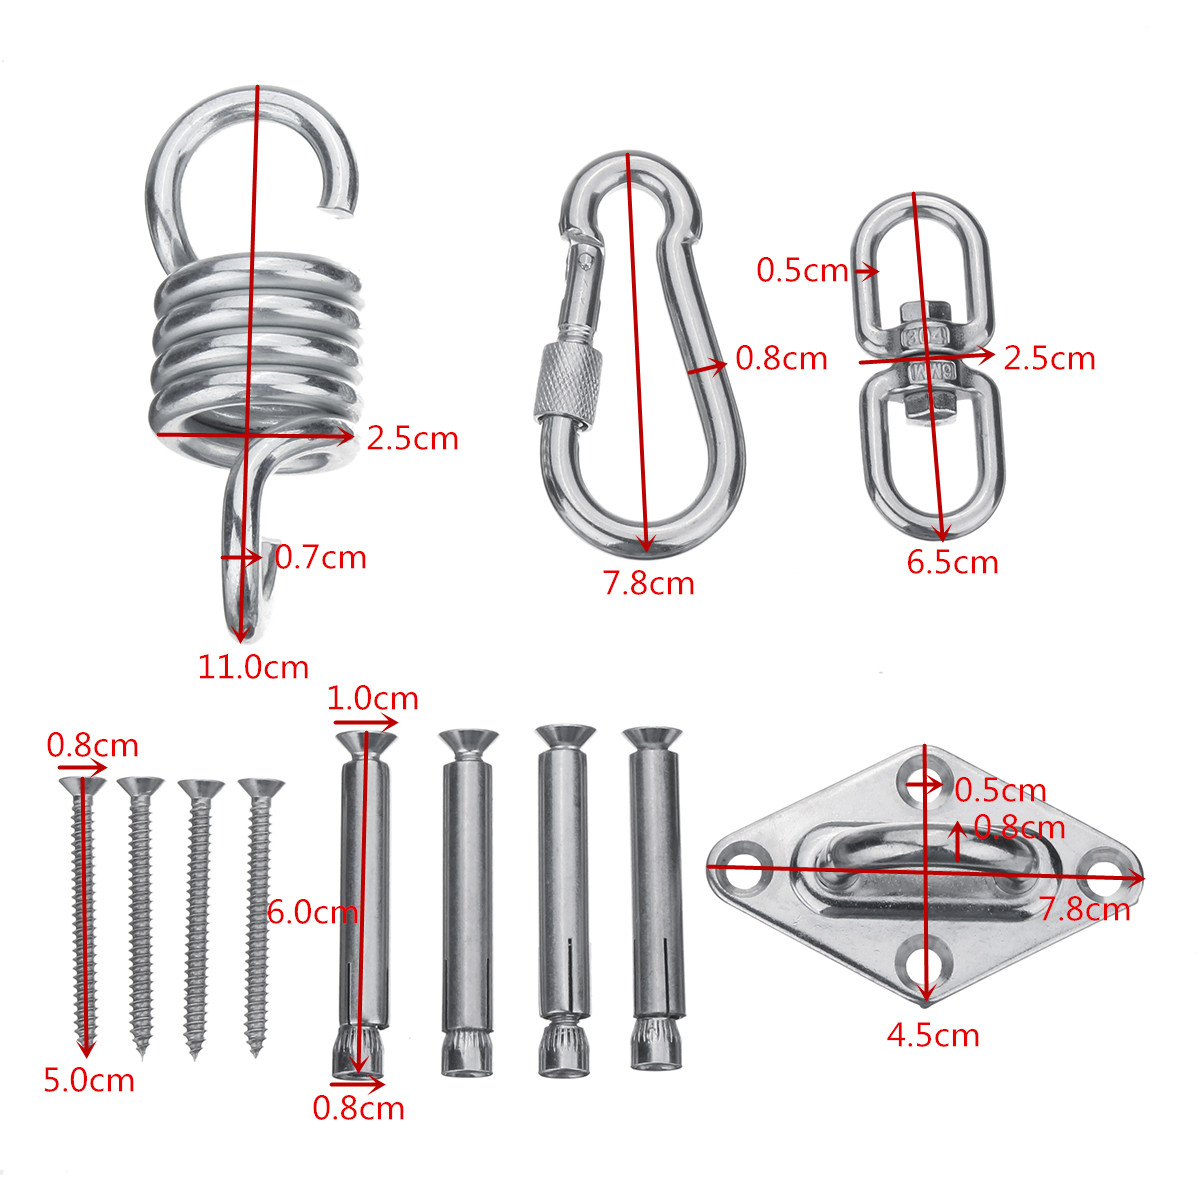 OUTDOOR WIND 1000 LB Capacity Hammock Chair Swivel Hanging Kit Stainless Steel Suspension Ceiling Hooks Hammock Hanger-1pc 360° Rotation Piece,1 Spring Snap Hook,2 Concrete Anchor,2 hex lag Bolts 